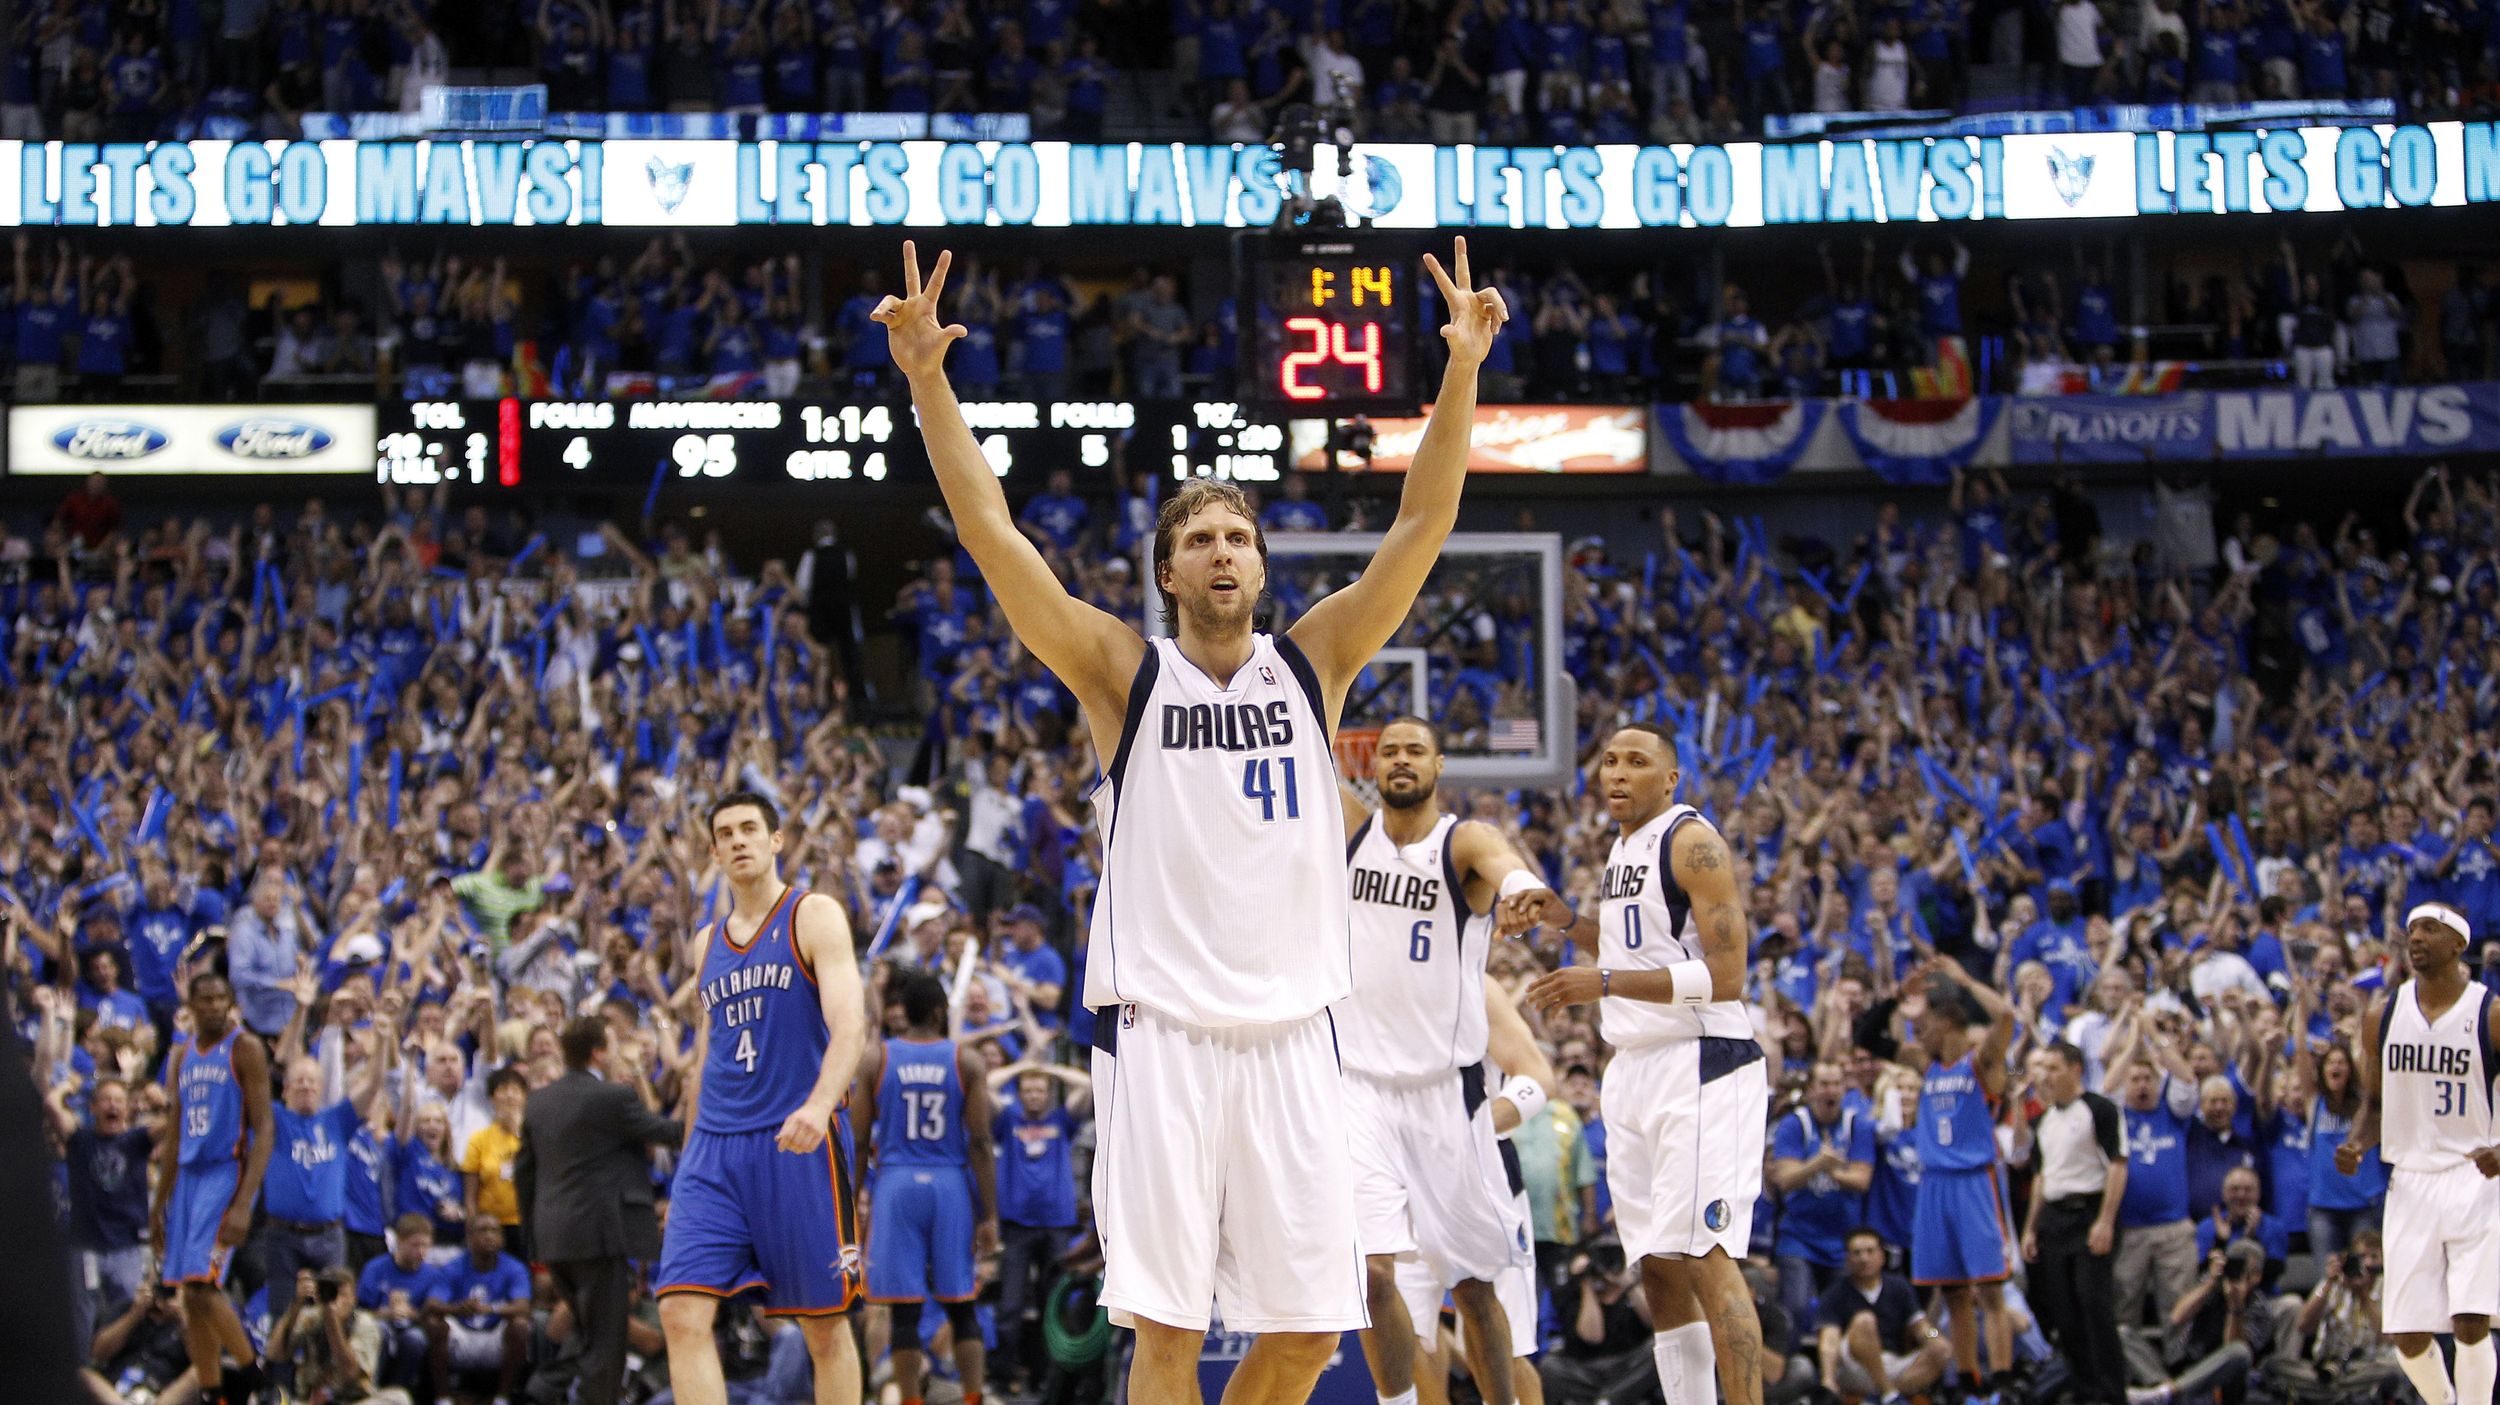 Dirk Nowitzki to take part in 'HooperVision' stream of Mavs-Cavs